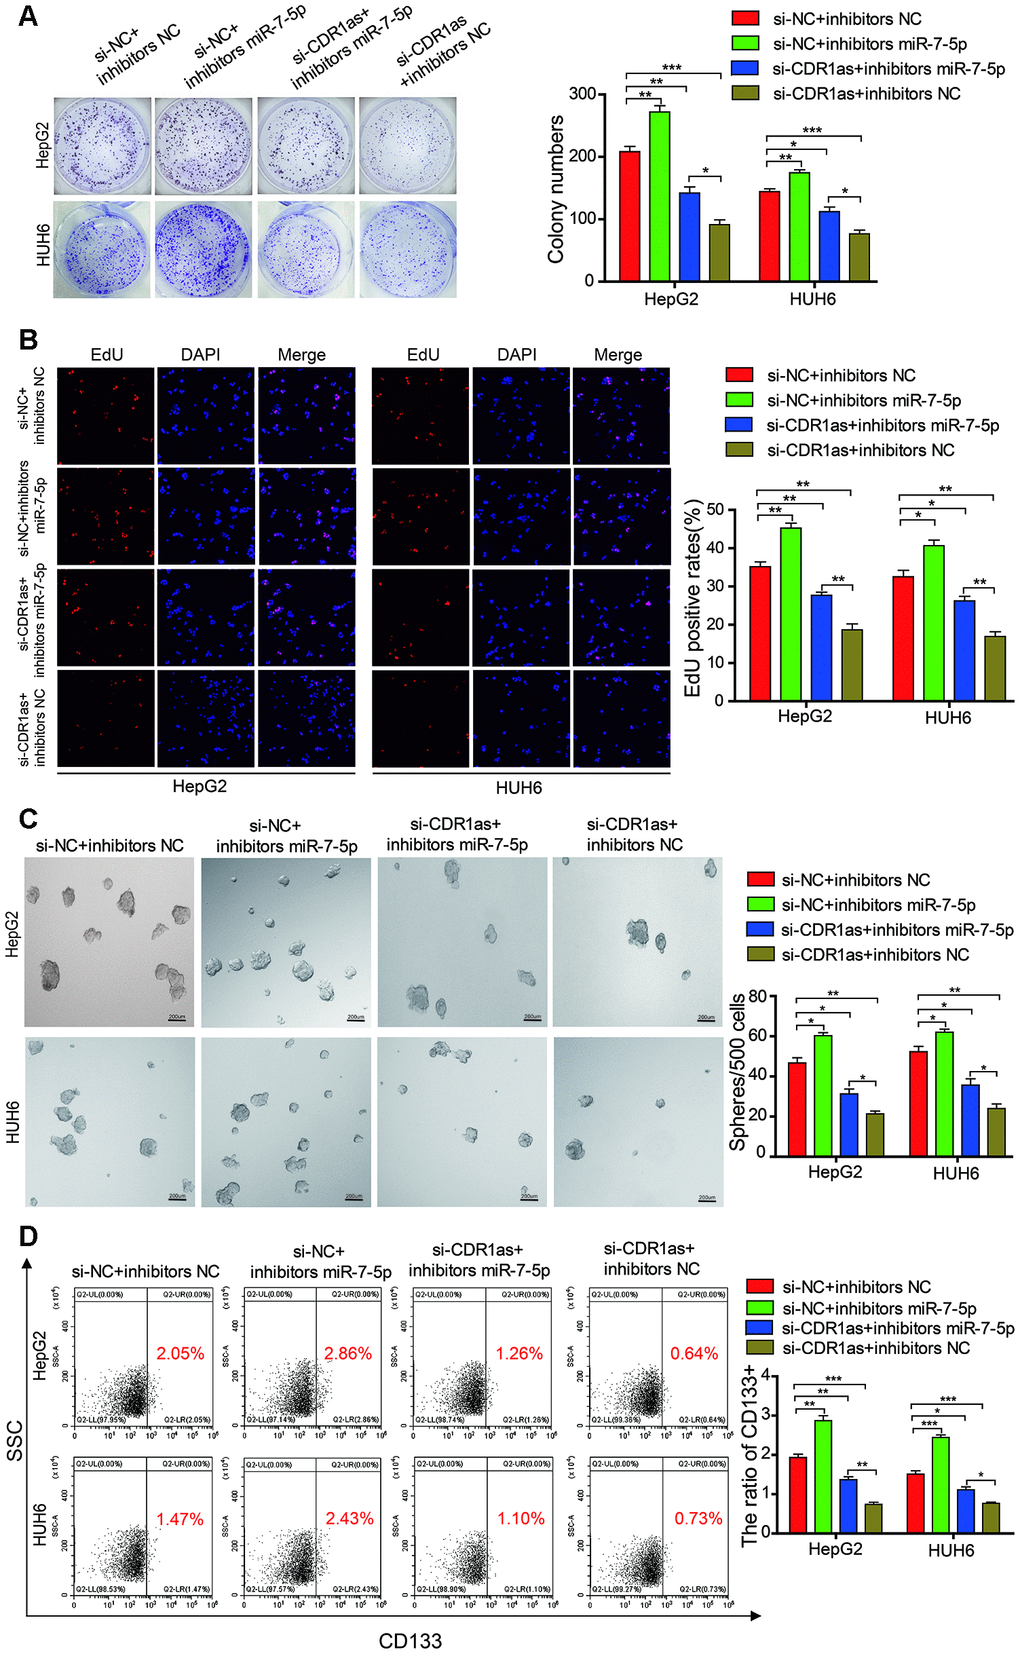 MiR-7-5p attenuates the function of CDR1as in HB cells. (A, B) The colony formation assay and EdU assay indicated that transfected with si-CDR1as could decrease the cell proliferative ability in HepG2 and HUH6 cells, and the co-transfection of si-CDR1as and miR-7-5p inhibitors abolished the si-CDR1as-induced attenuation of cell proliferation; (C) The sphere-forming assay indicated that transfected with si-CDR1as could decrease the sphere-forming capacity in HepG2 and HUH6 cells, and the co-transfection of si-CDR1as and miR-7-5p inhibitors abolished the si-CDR1as-induced attenuation of sphere-forming capacity; (D) The flow cytometric analysis indicated that transfected with si-CDR1as could decrease the proportion of CD133+ cells in HepG2 and HUH6 cells, and the co-transfection of si-CDR1as and miR-7-5p inhibitors abolished the si-CDR1as-induced decrease of CD133+ cells rate. Scale bar, 200 μm. Data are presented as the mean ± SEM of three experiments. *P 